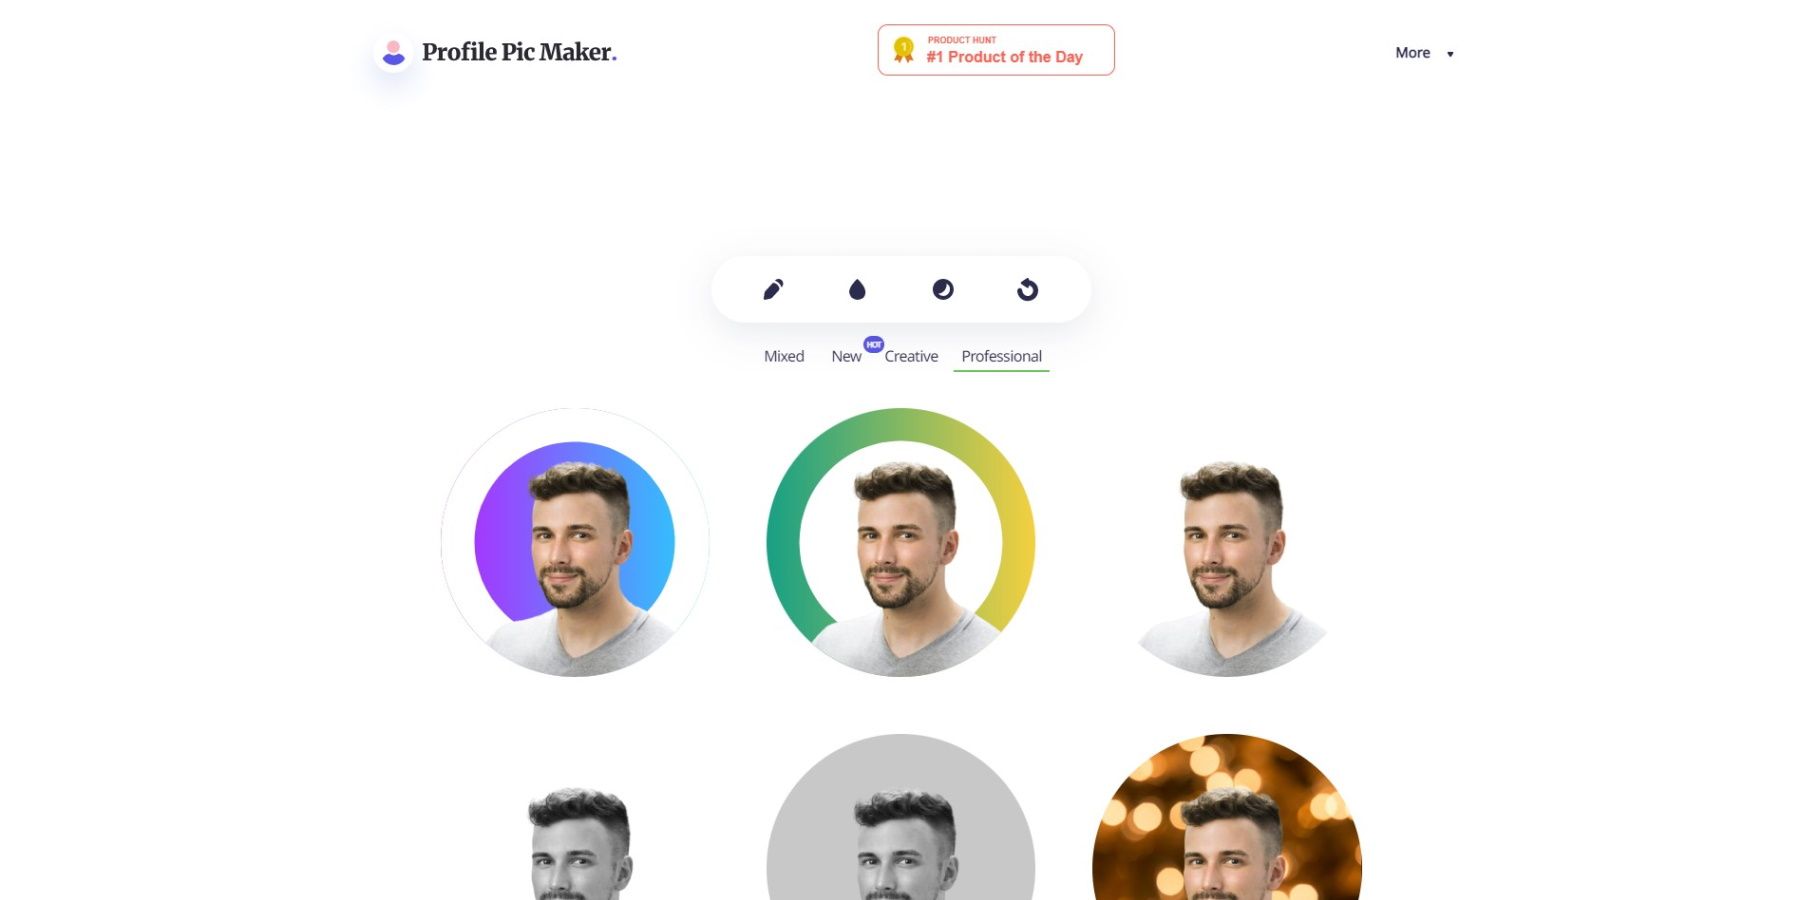 Profile Pic Maker showing options for a man's professional profile picture 